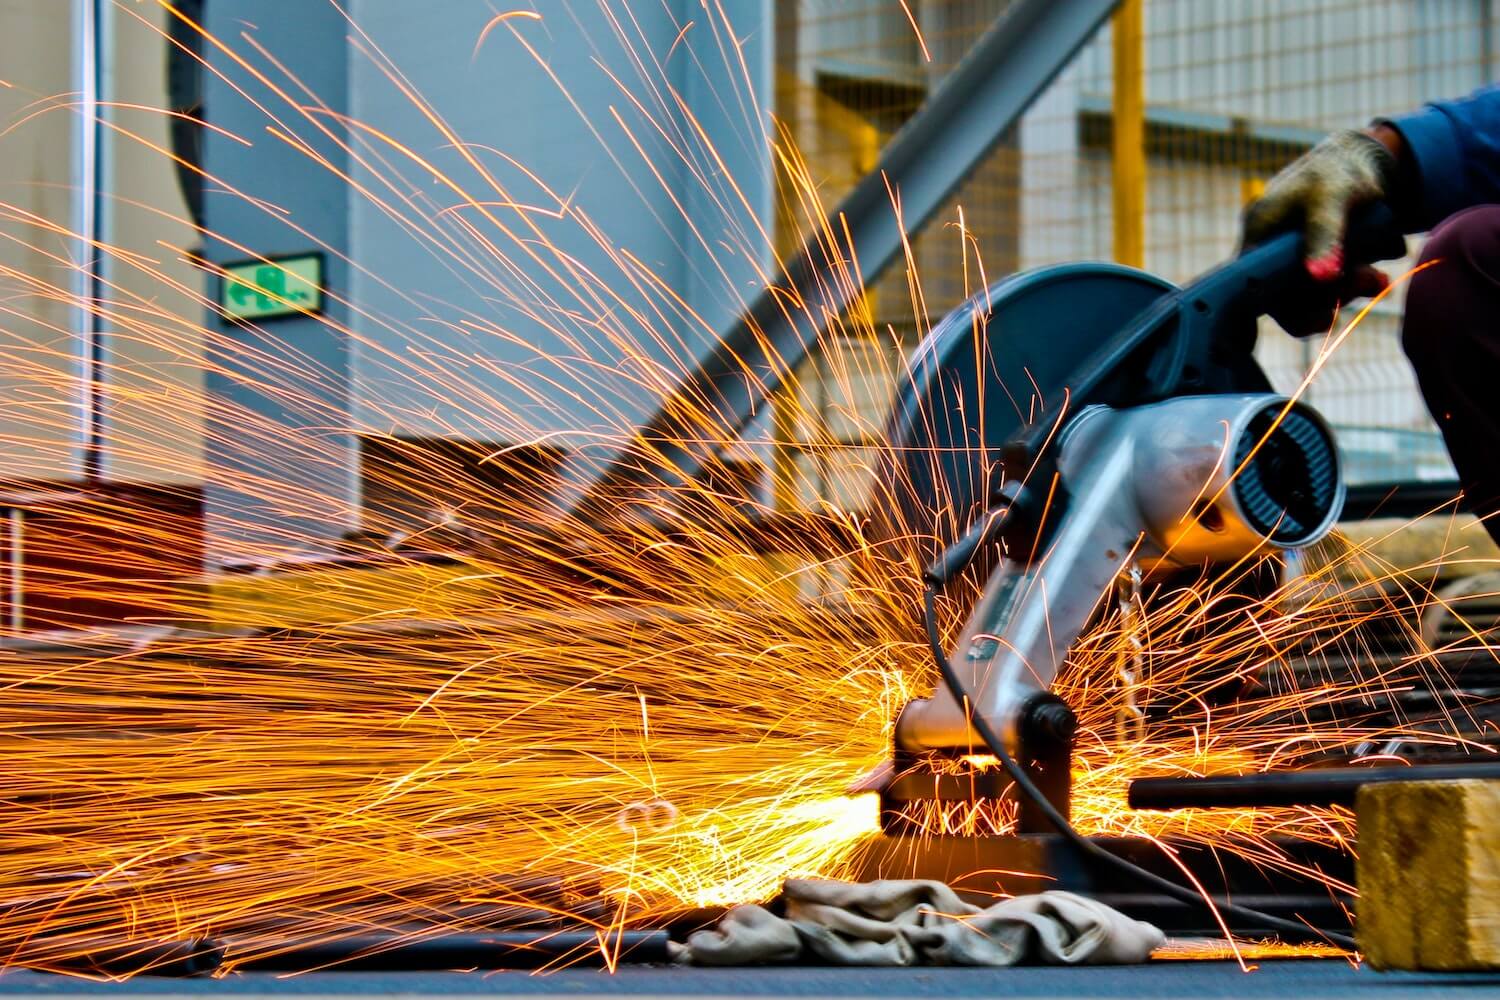 A worker operates a grinding machine, producing a shower of bright sparks. The worker wears protective gloves, focusing on the task. The background includes industrial equipment and safety barriers. This scene of intense manual labor underscores the importance of insurance for builders in such an industrial setting.